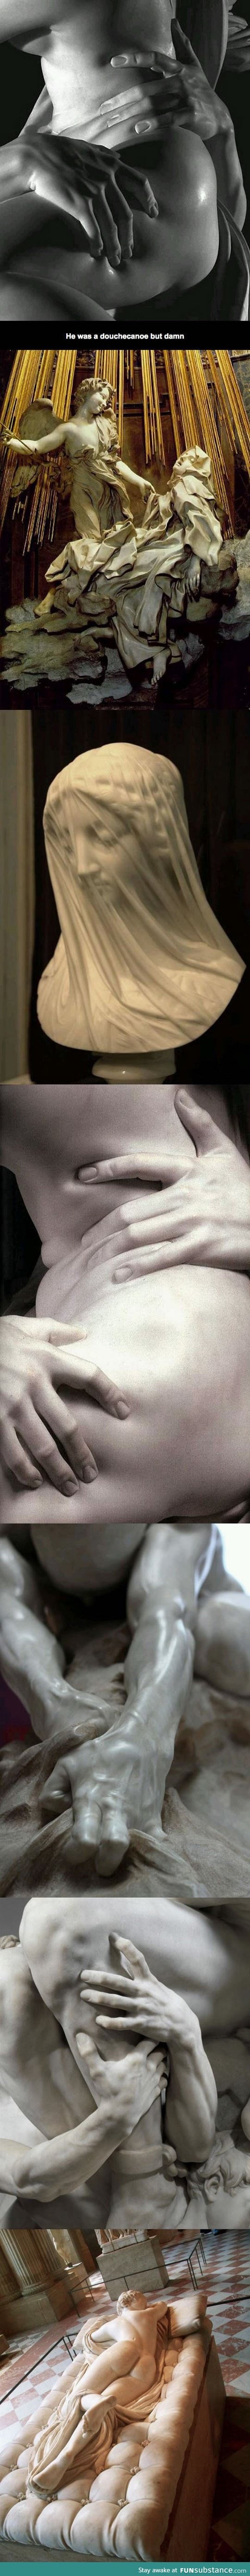 Sculptor Gian Lorenzo Bernini Did All This Using Marble In The 17th Century